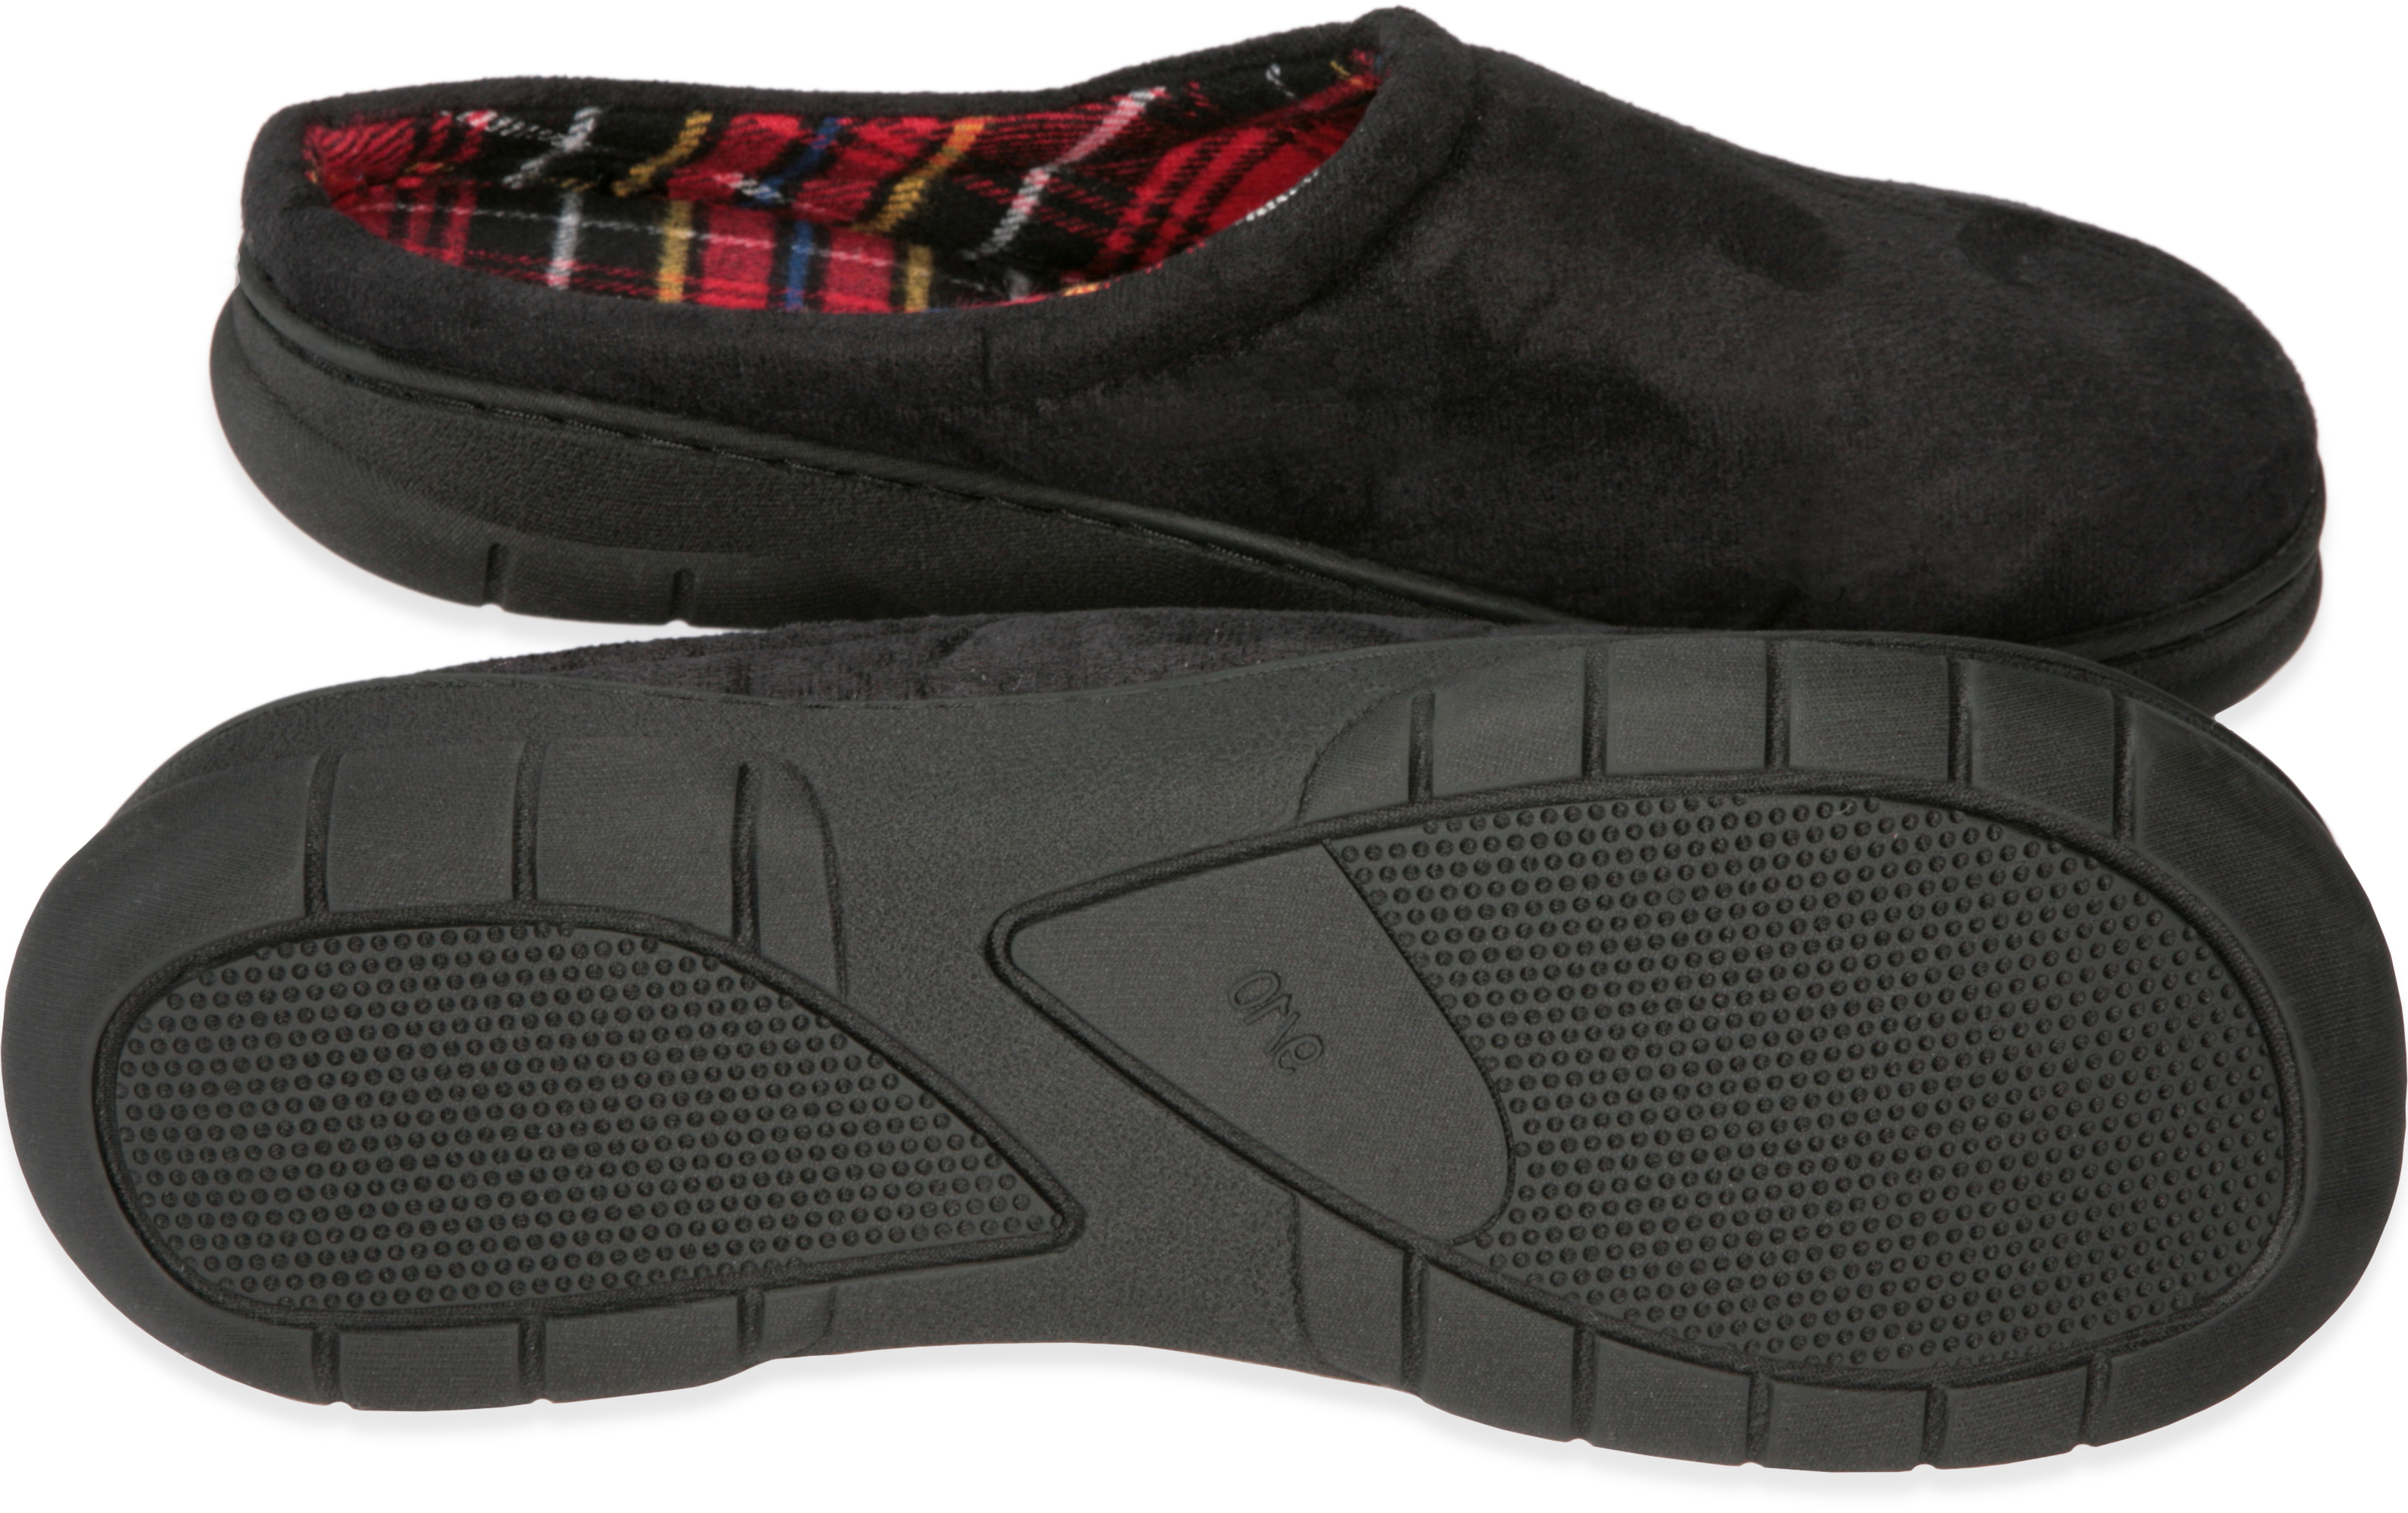 Deluxe Comfort Men's Memory Foam Slipper, Size 13-14 – Suede Vamp Checkered Lining – Memory Foam Insole – Strong TPR Outsole – Men's Slippers, Black Suede - image 5 of 5